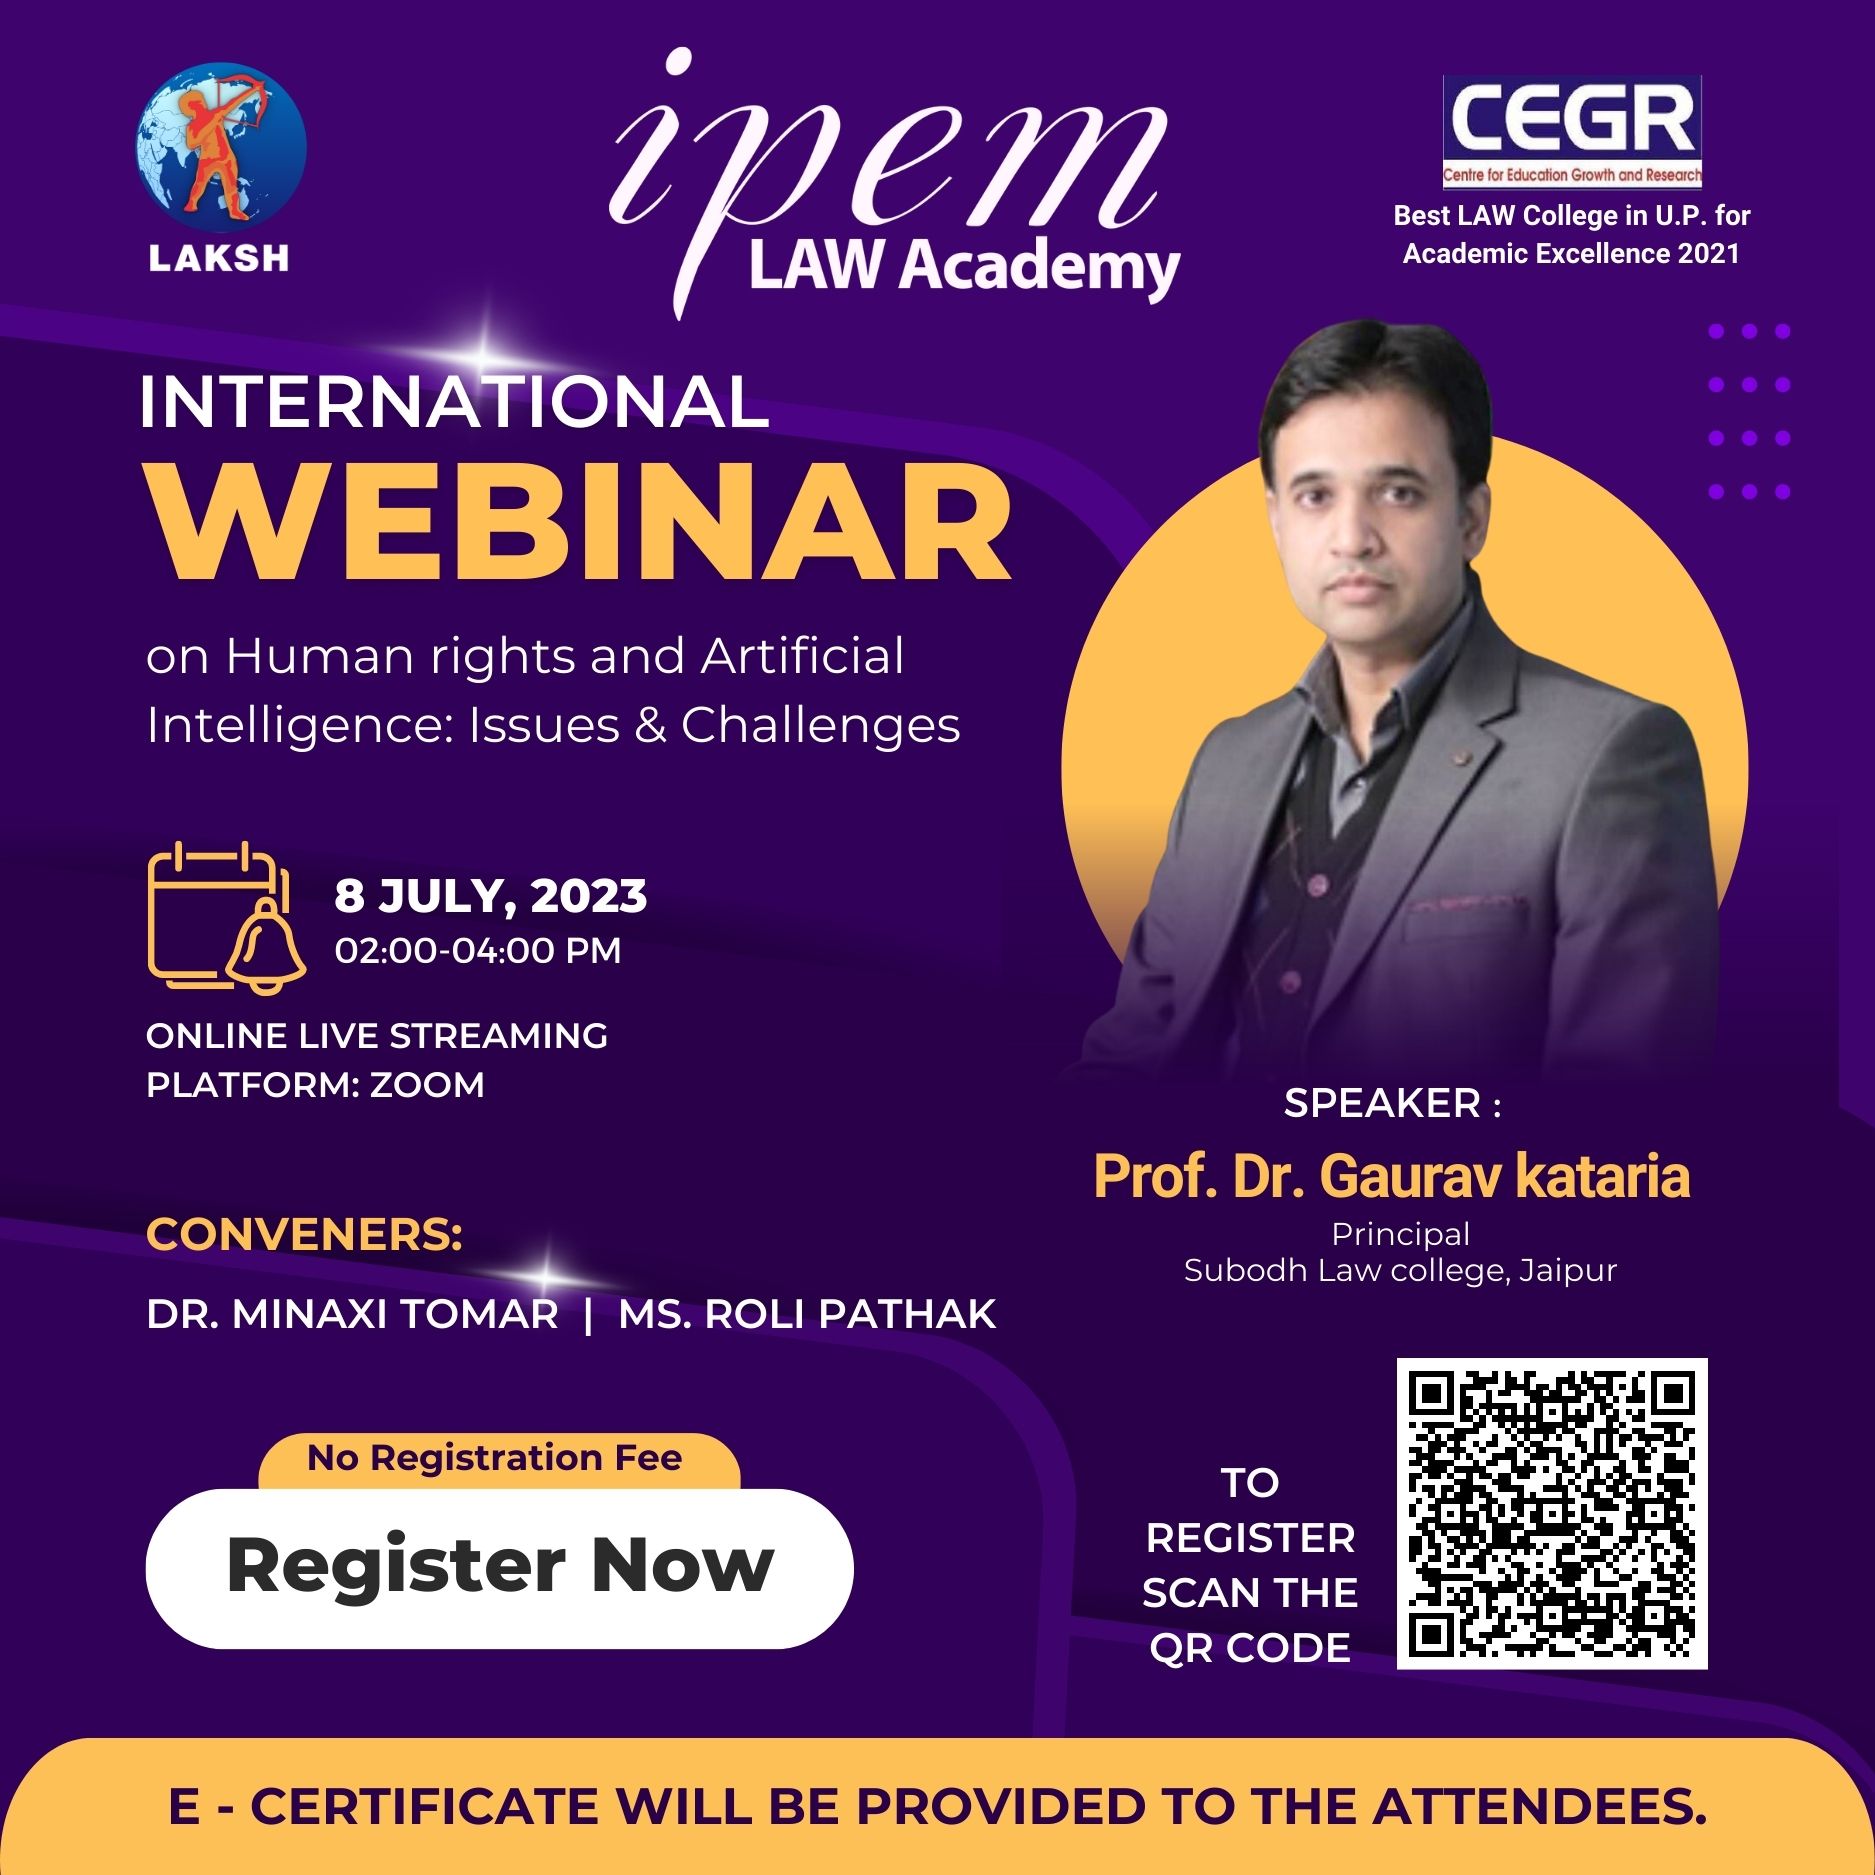 International Webinar On ‘Human Rights And Artificial Intelligence: Issues And Challenges’ By IPEM Law Academy (NAAC Accredited) [8th July 2023(Saturday)]: Register Now!